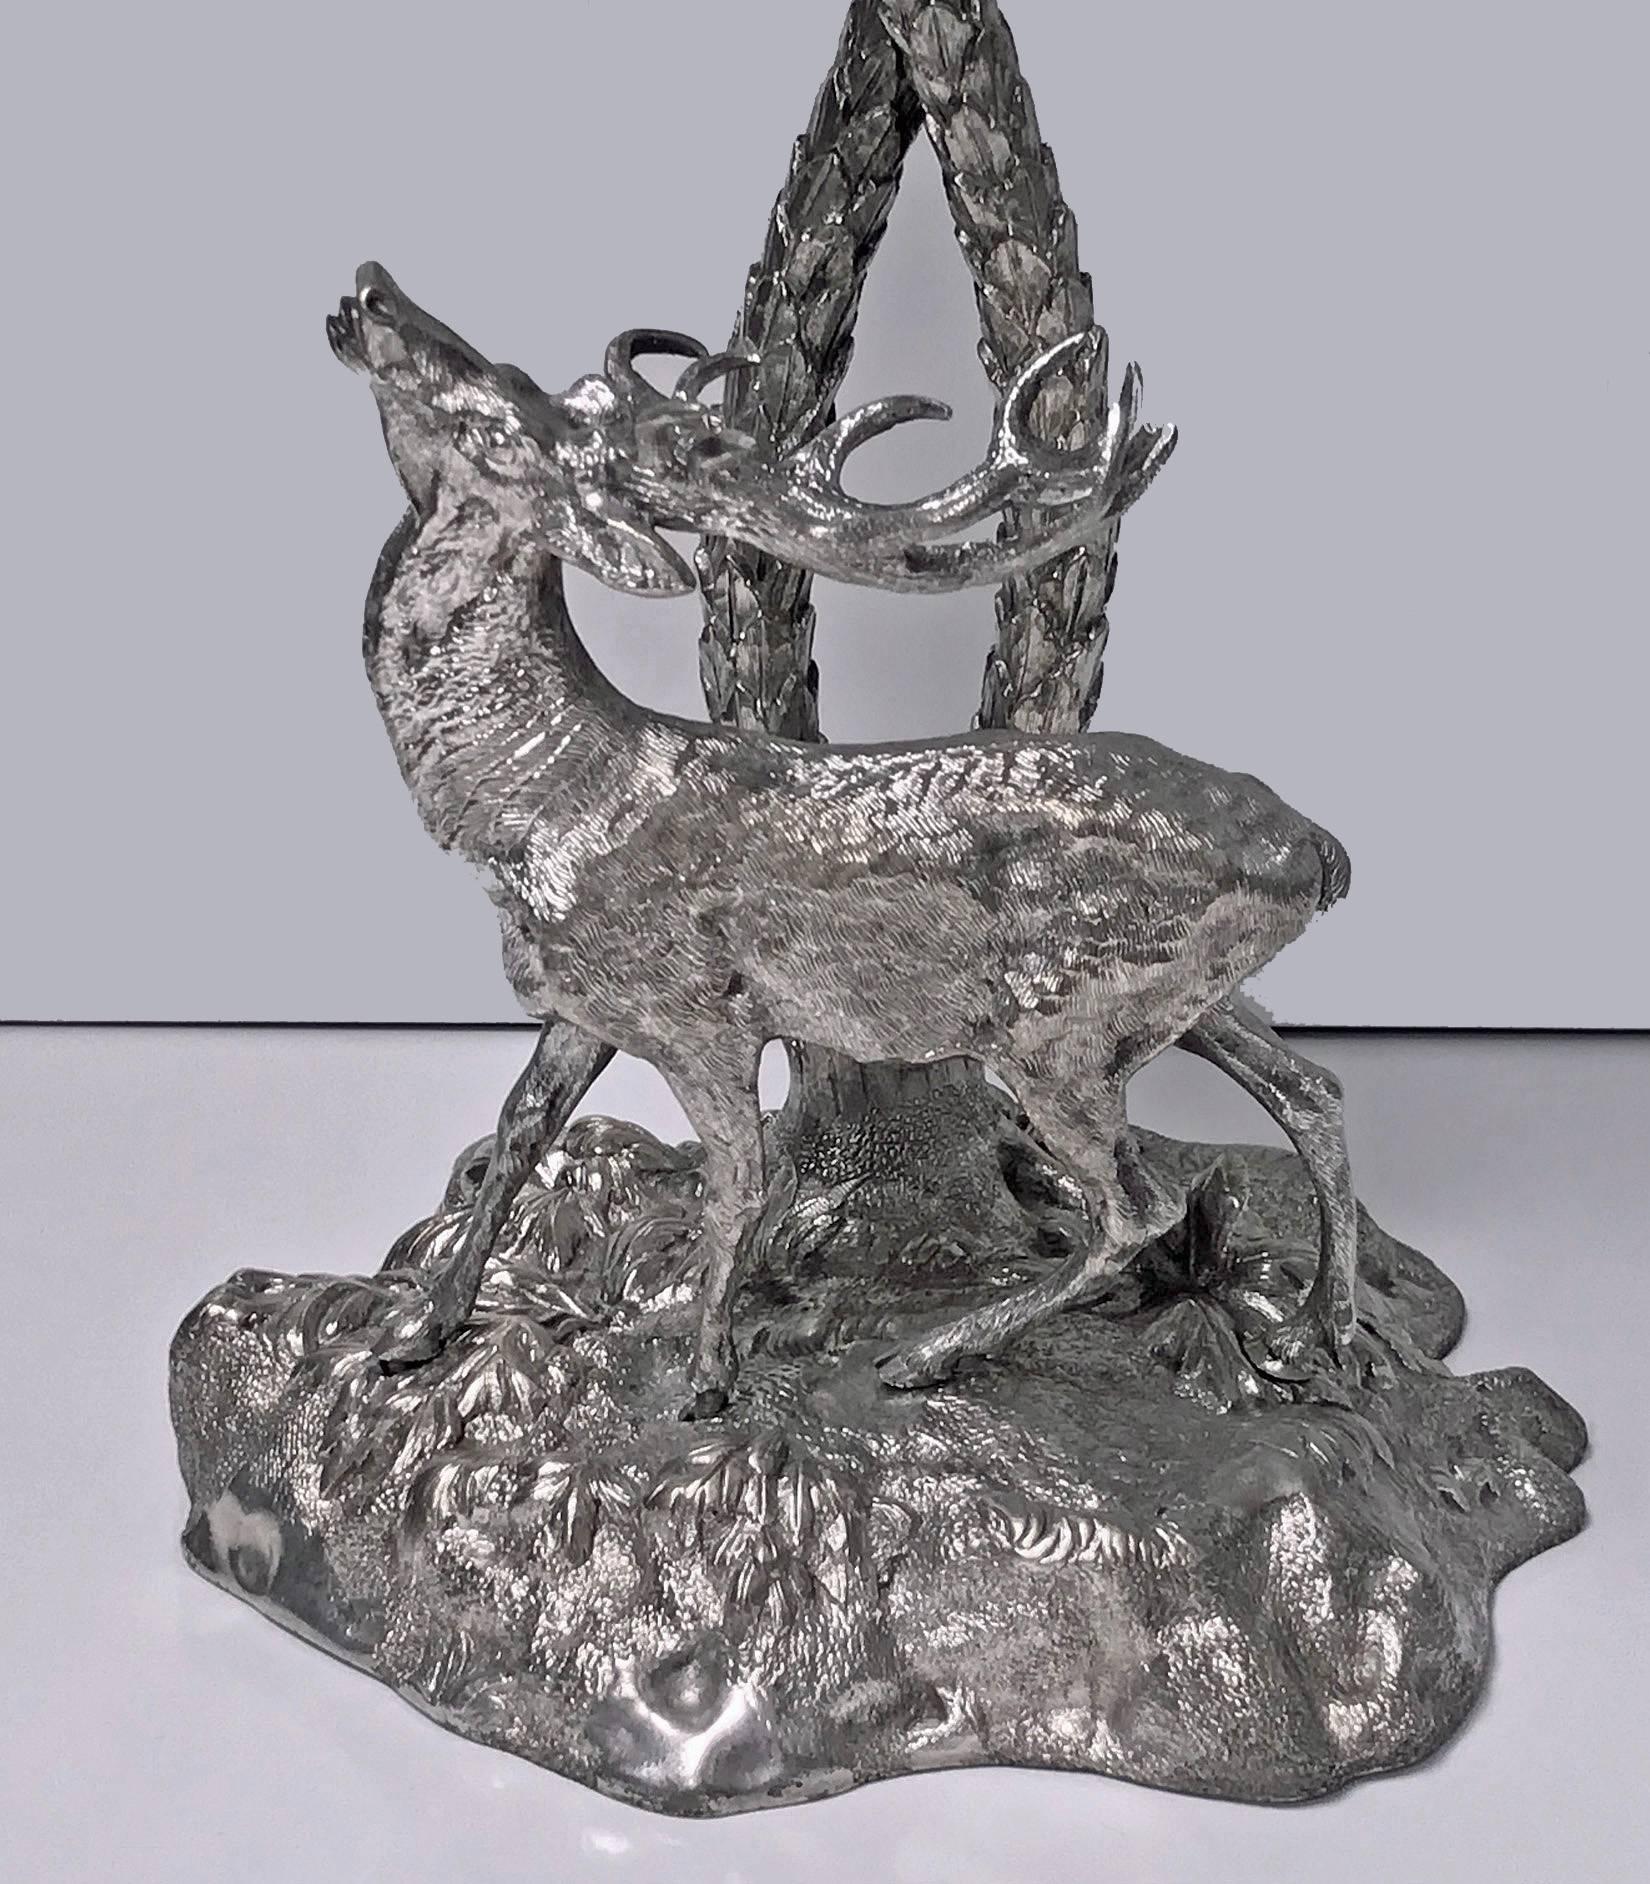 19th century Victorian Elkington style centrepiece, English, circa 1870. Silver-plated bronze cast in the form of a deer gazing up at palm trees. Measures: 17.00 (height) x 11.00 (breadth) x 7.00 (base) inches.